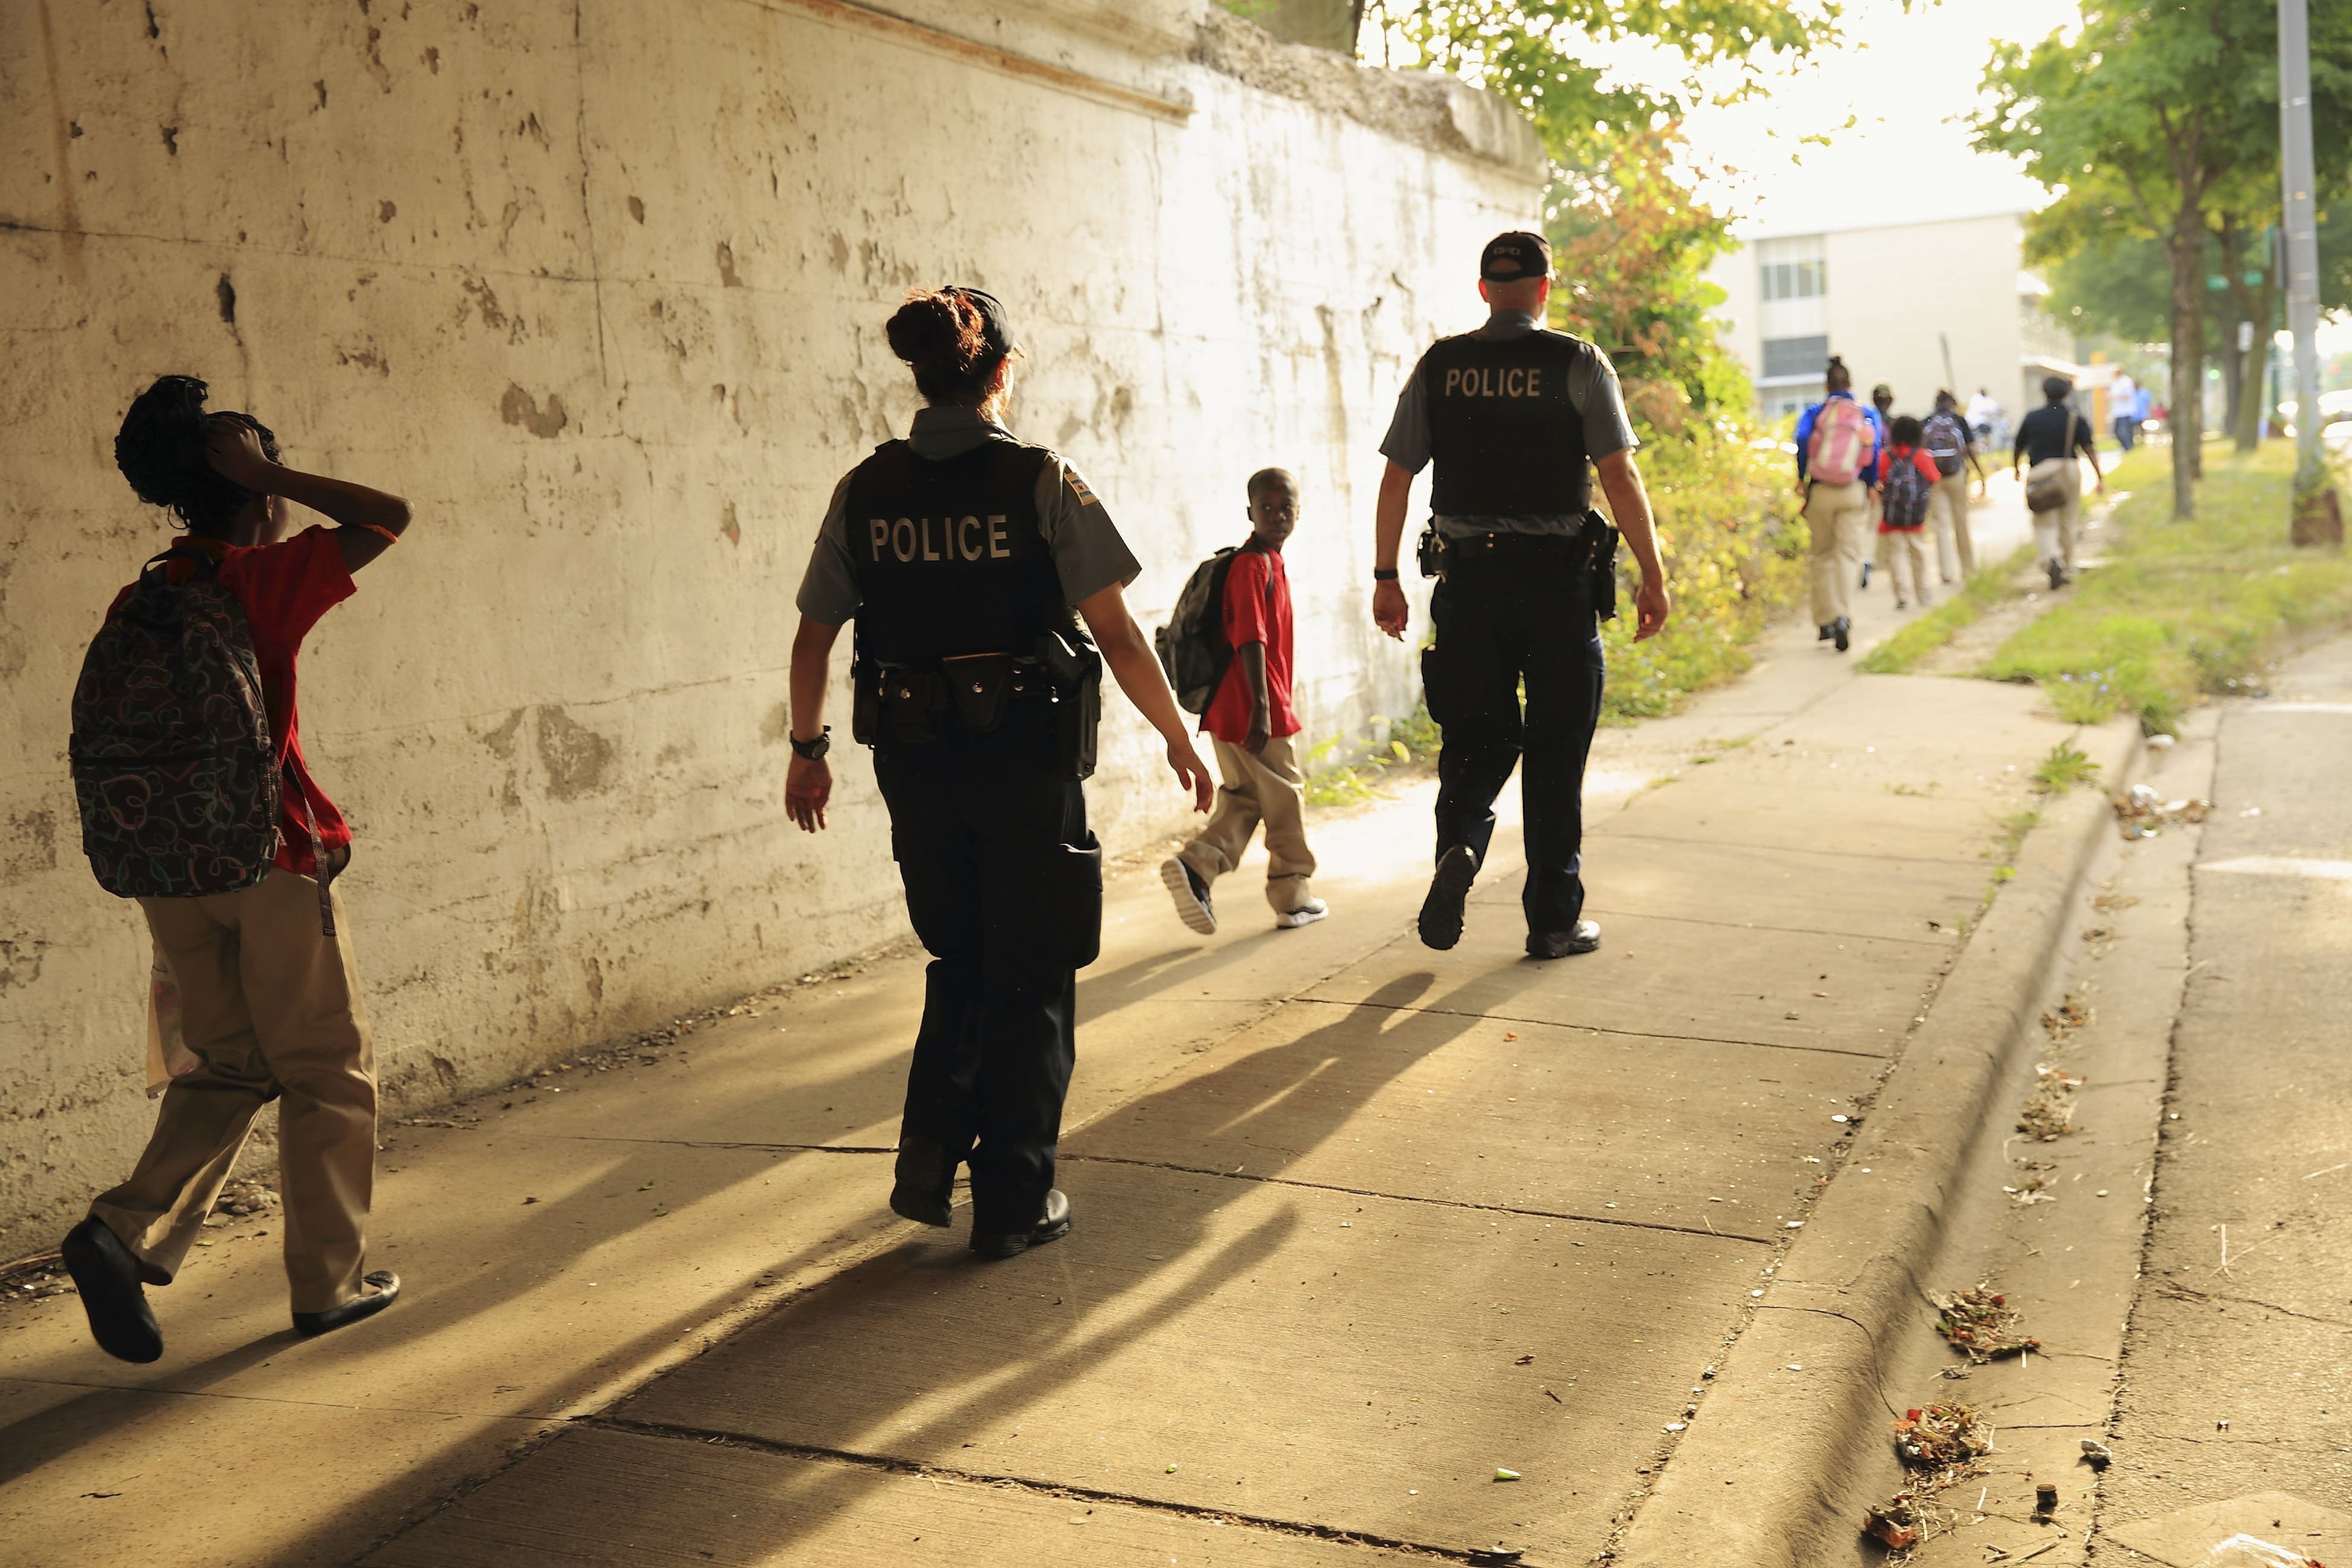 Two Chicago Police Department officers, wearing black vests with “POLICE” in white lettering on the back, escort children to school. The sun casts long shadows behind those walking down the sidewalk.